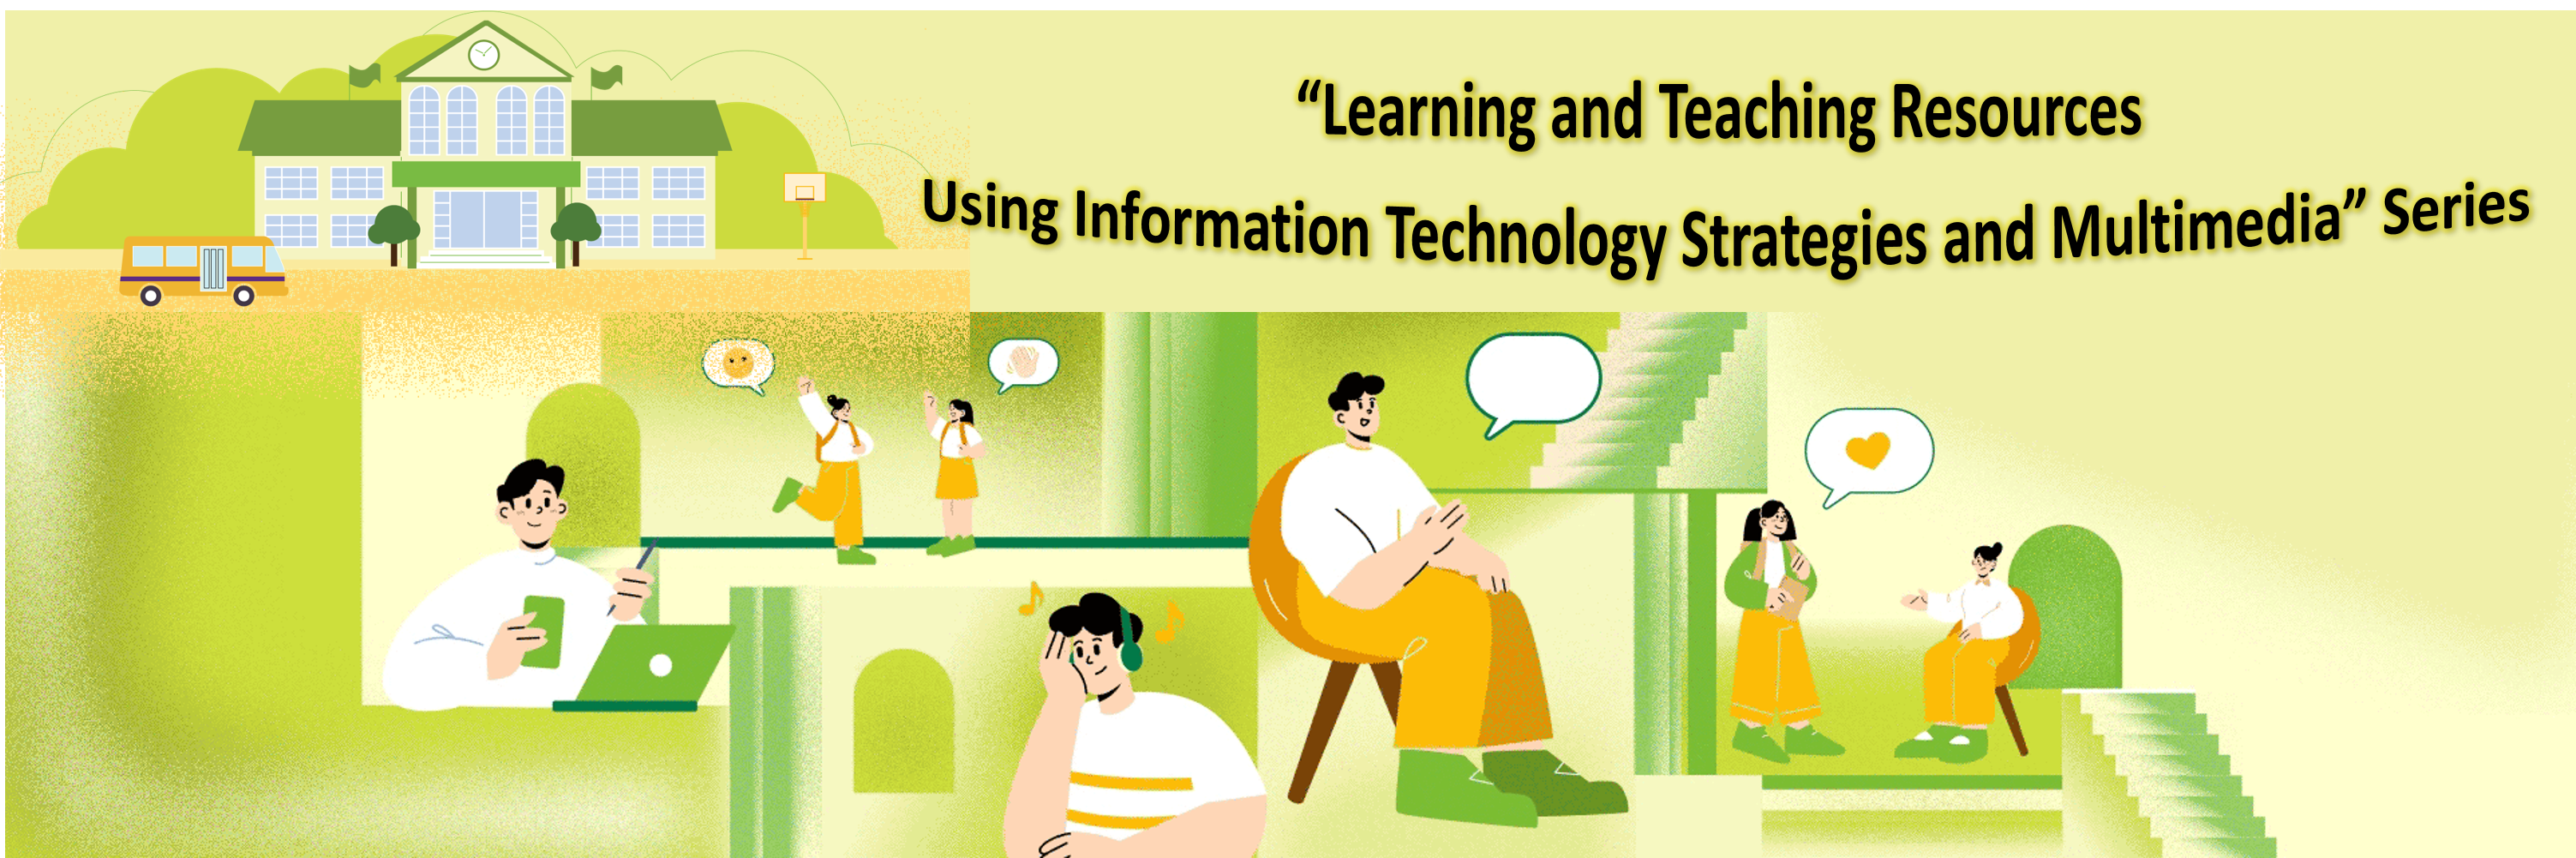 “Learning and Teaching Resources Using Information Technology Strategies and Multimedia” Series